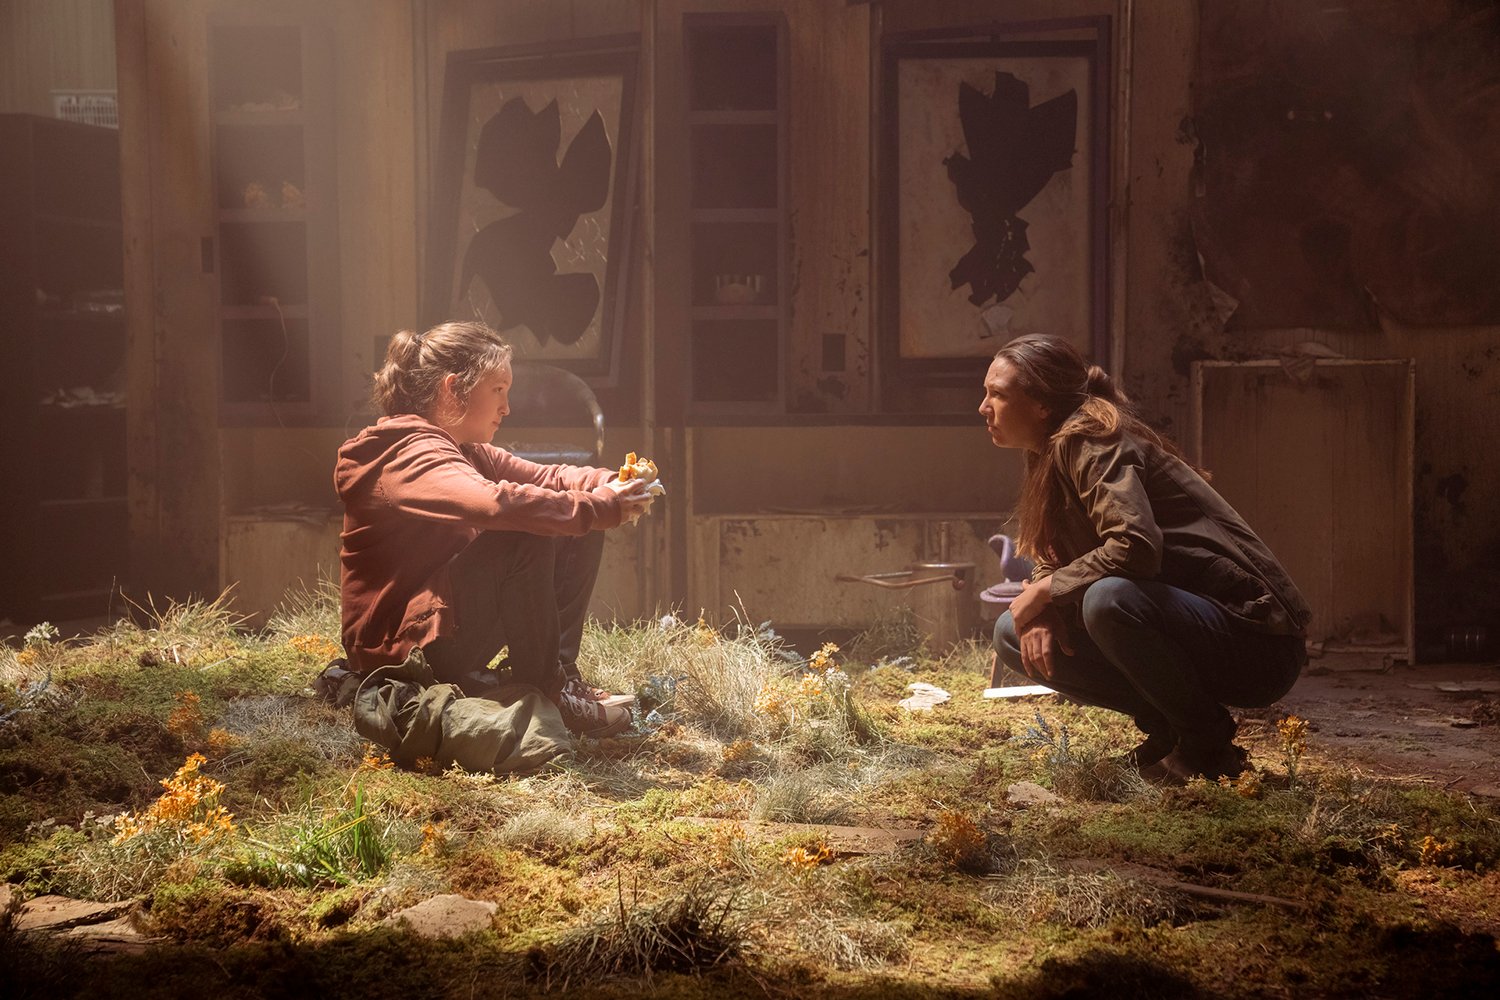 Bella Ramsey as Ellie and Anna Torv as Tess, two characters in The Last of Us on HBO